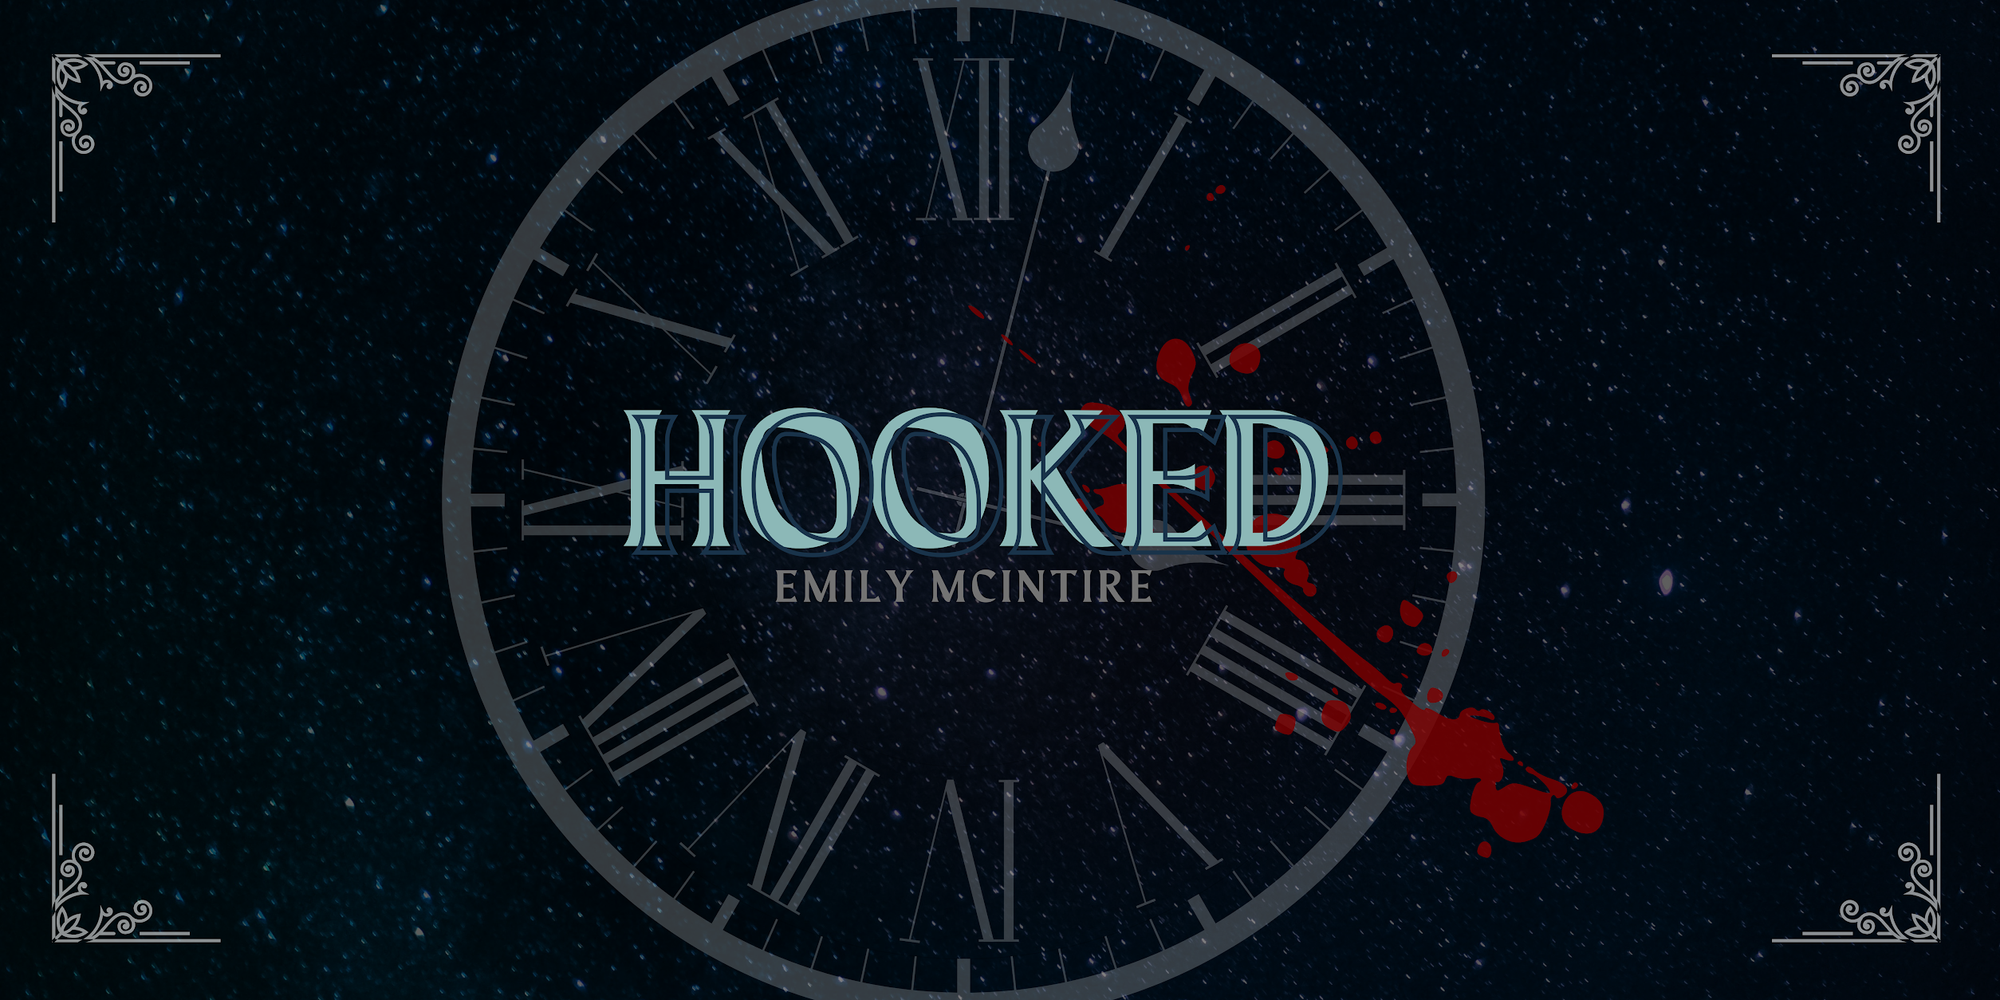 Hooked Book Review